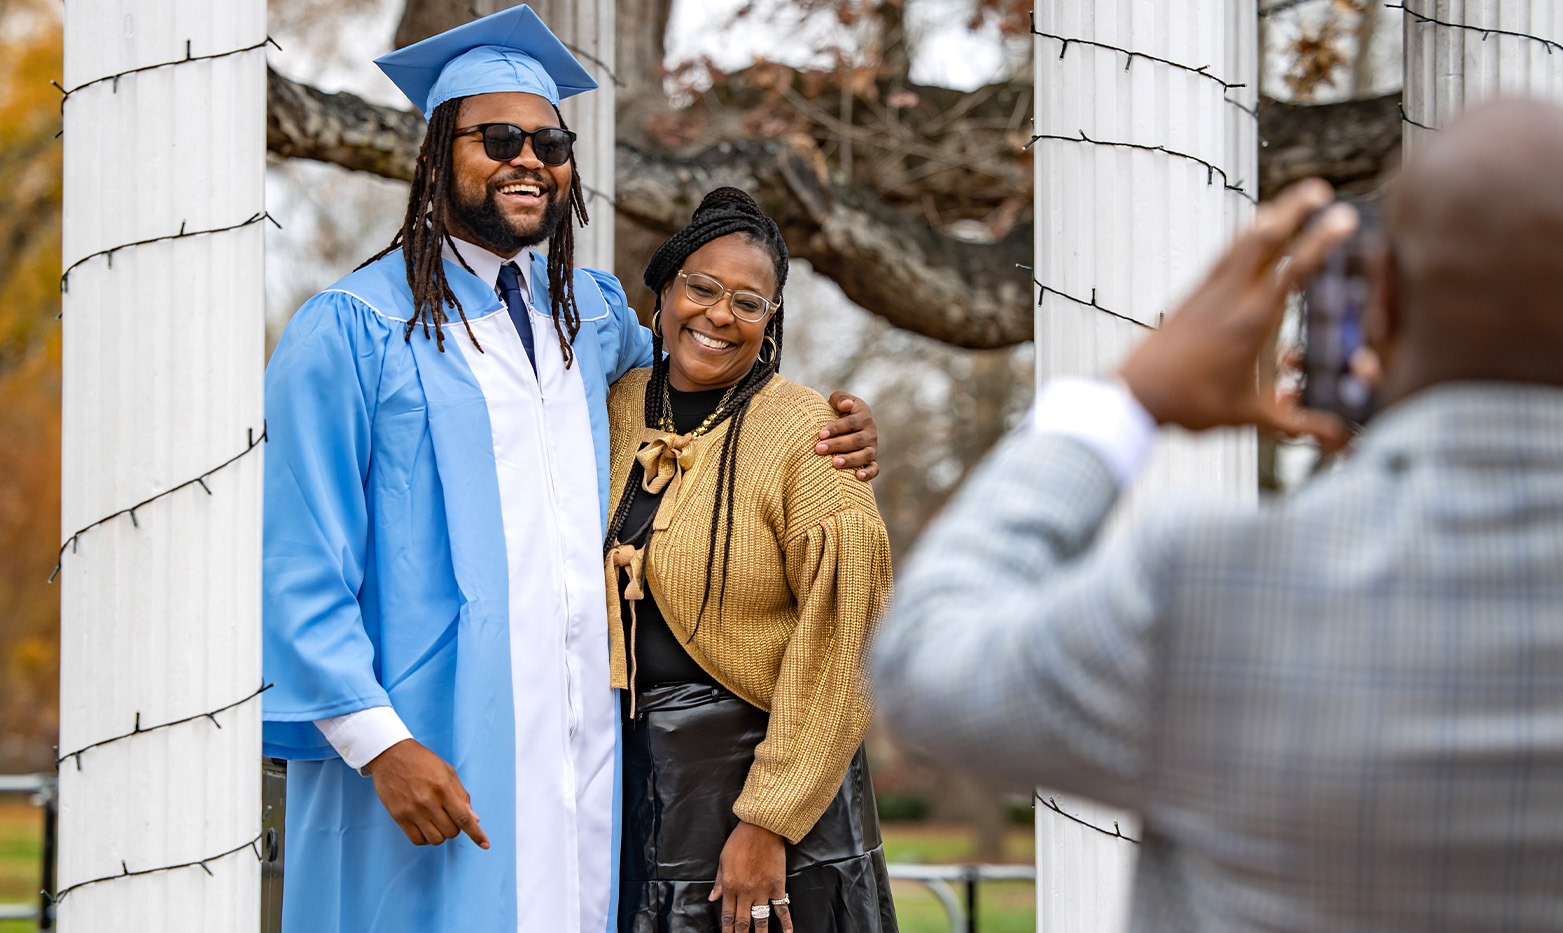 A graduate poses with a family member by the old well.